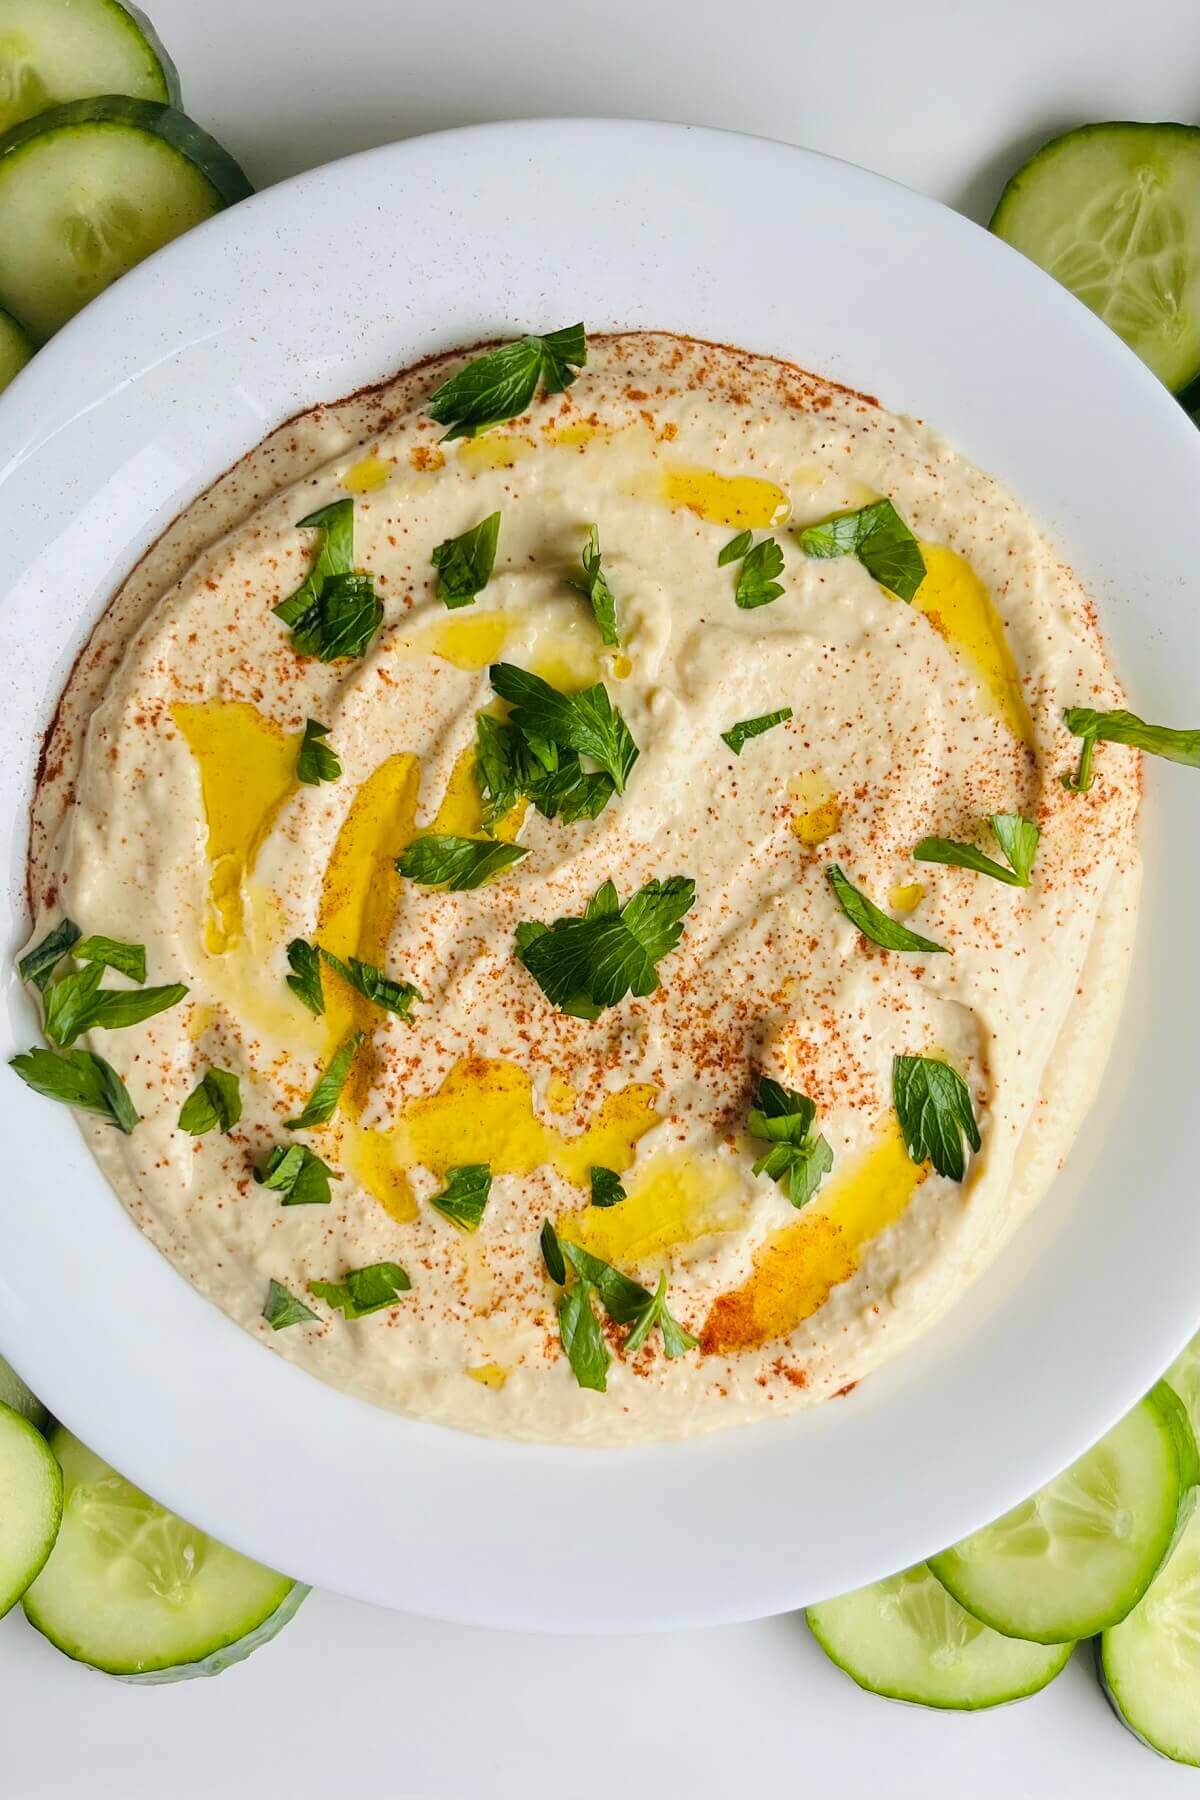 Hummus in a white dish garnished with fresh parsley.